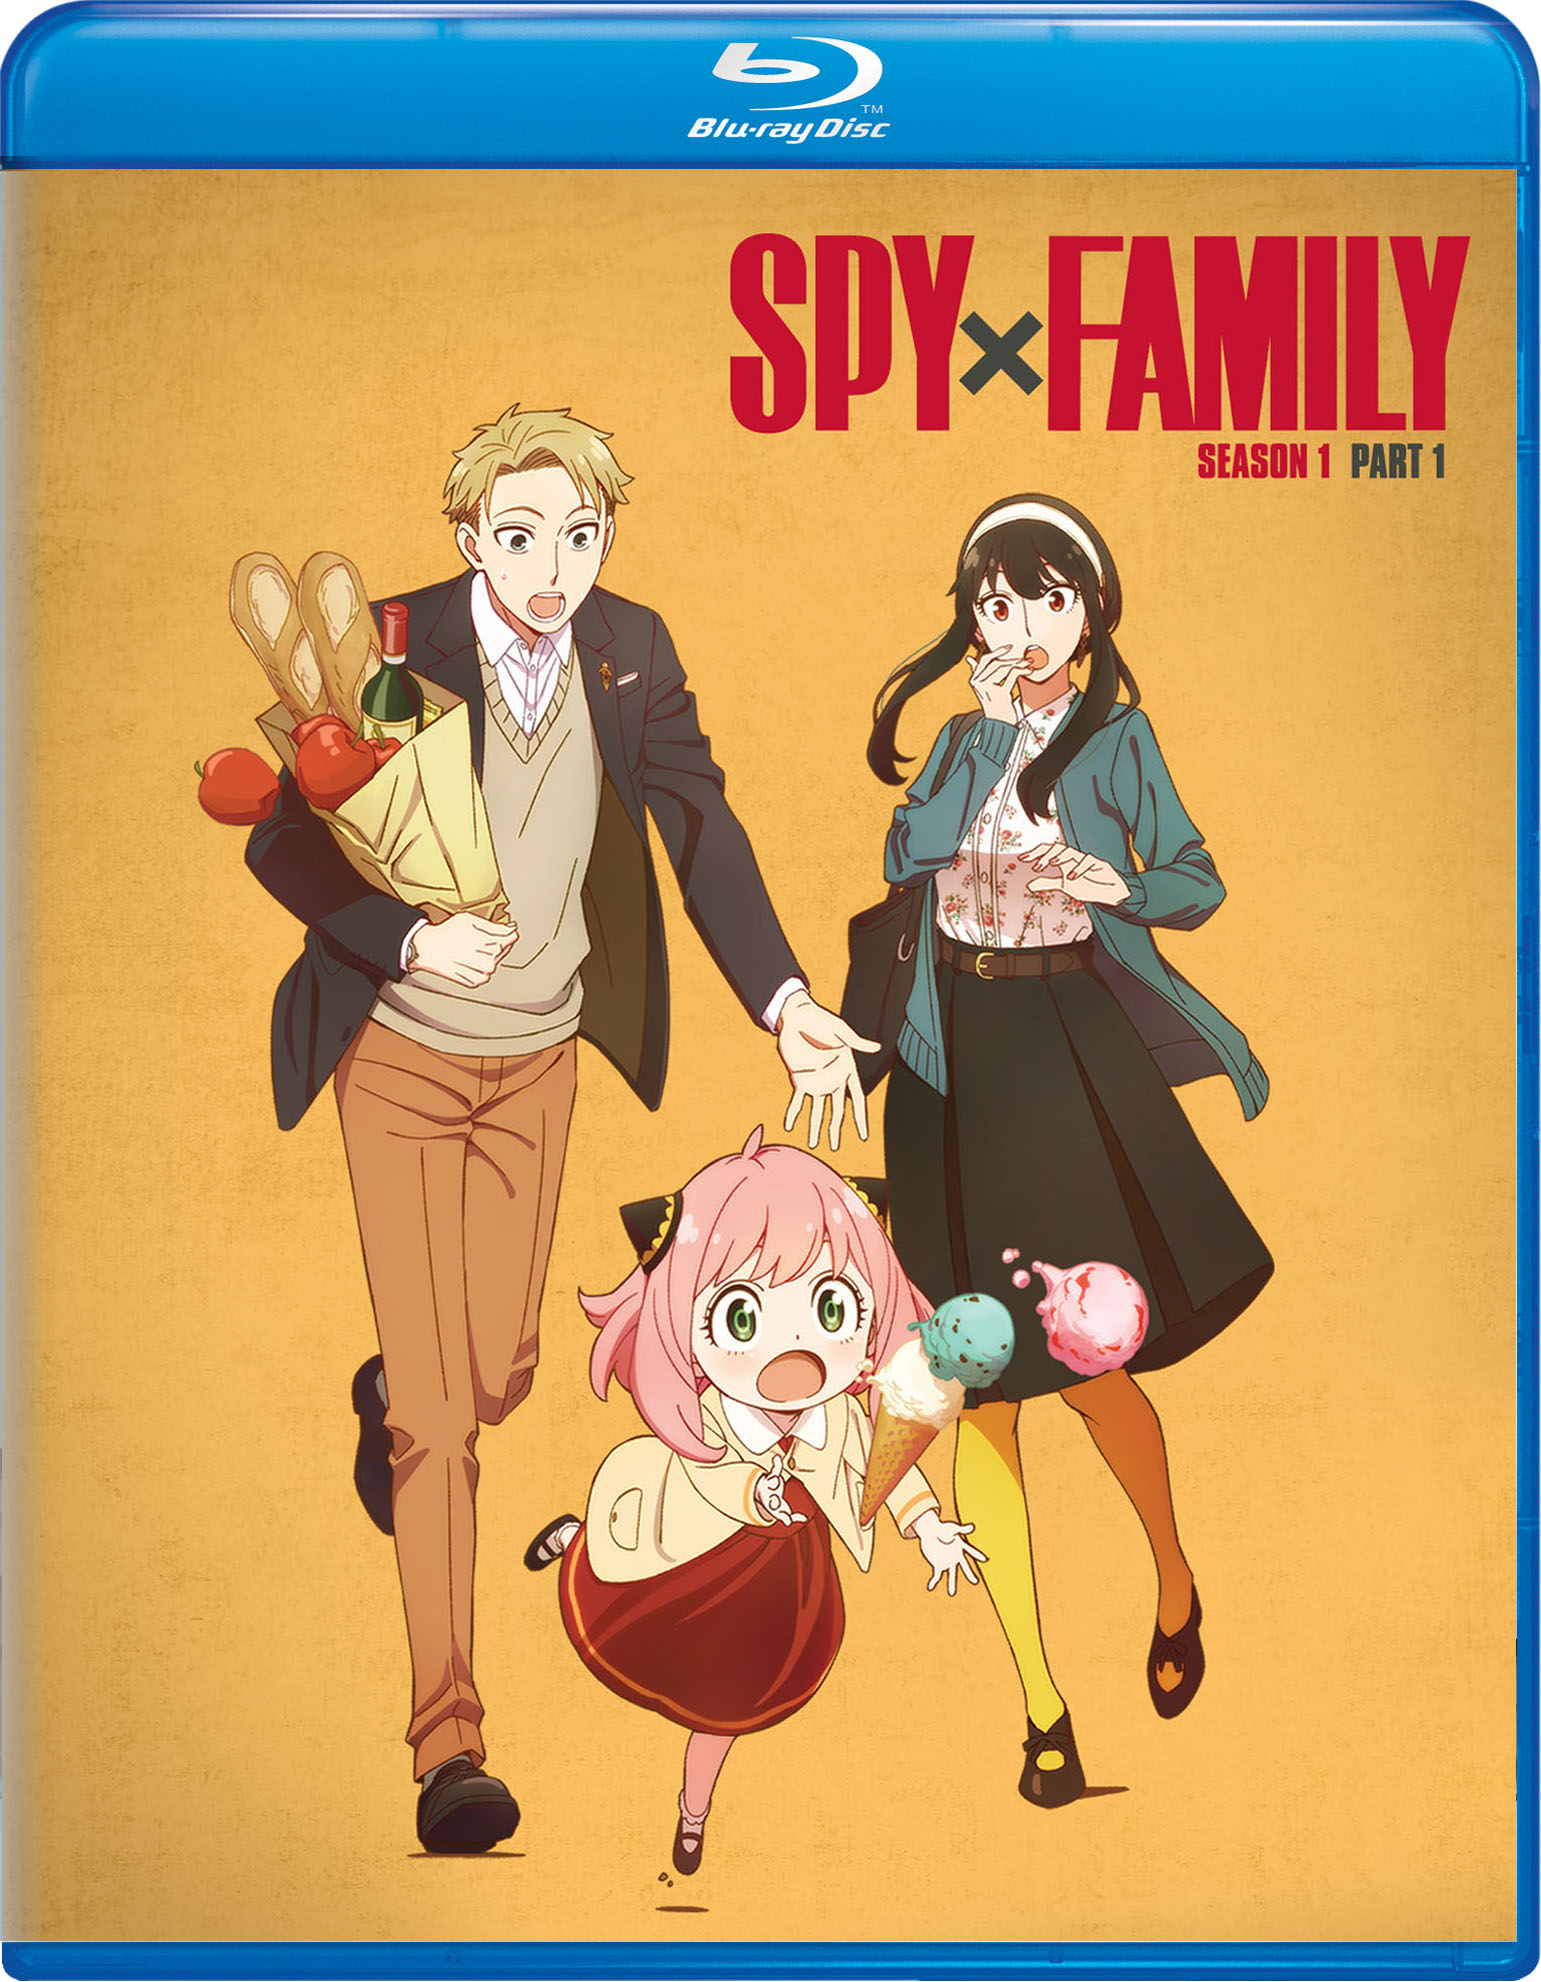 What to expect in Spy x Family Part 2